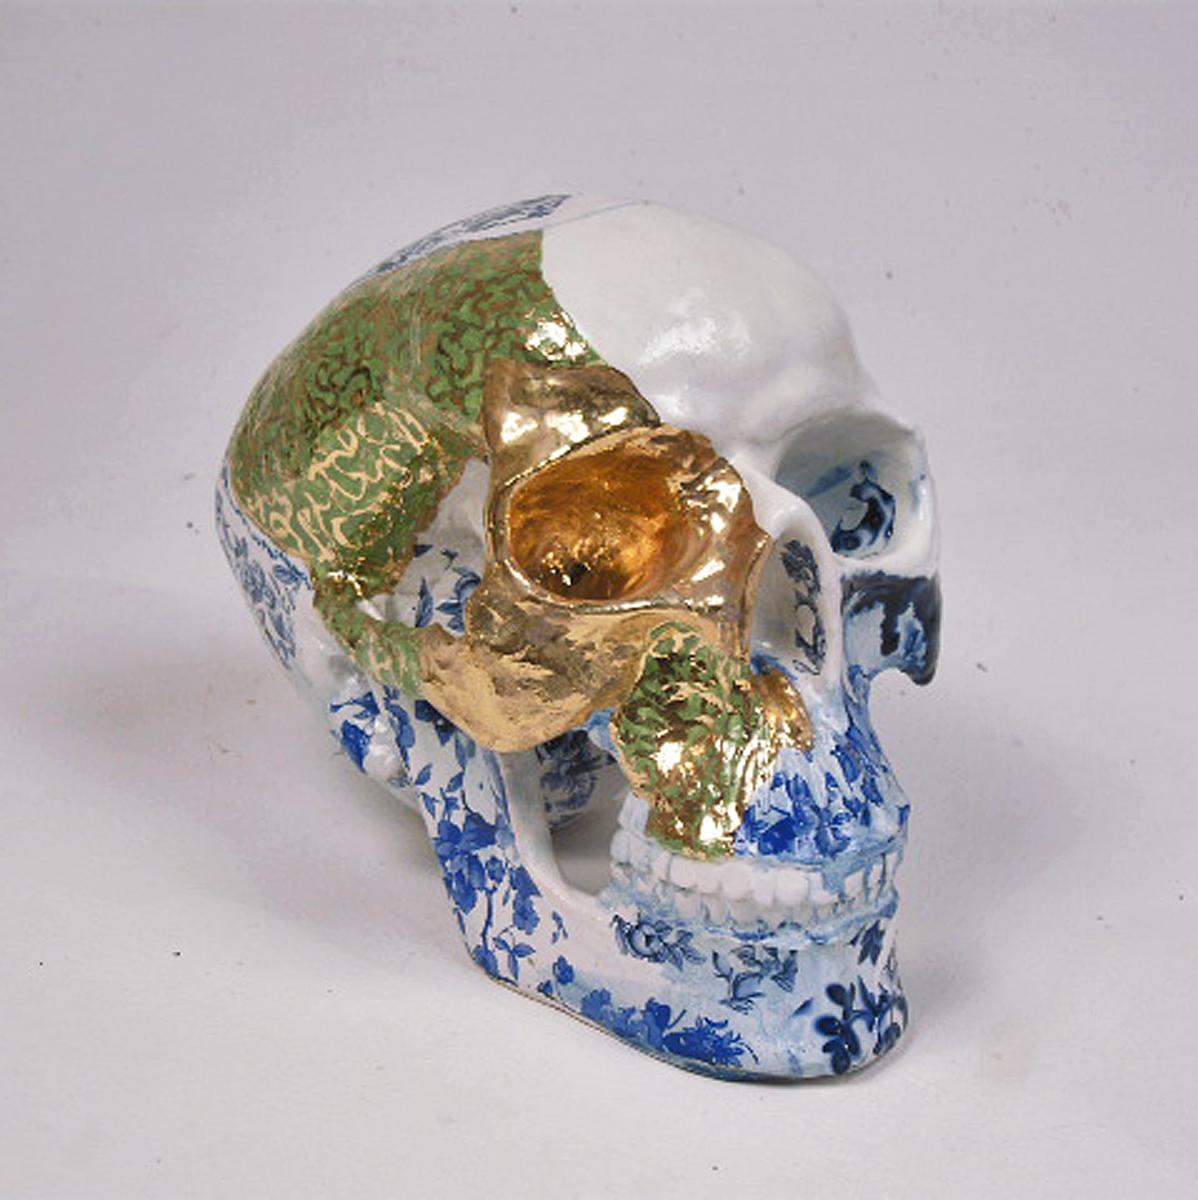 White Green and Blue Skull - contemporary ceramic sculpture - Sculpture by Pierre Williams